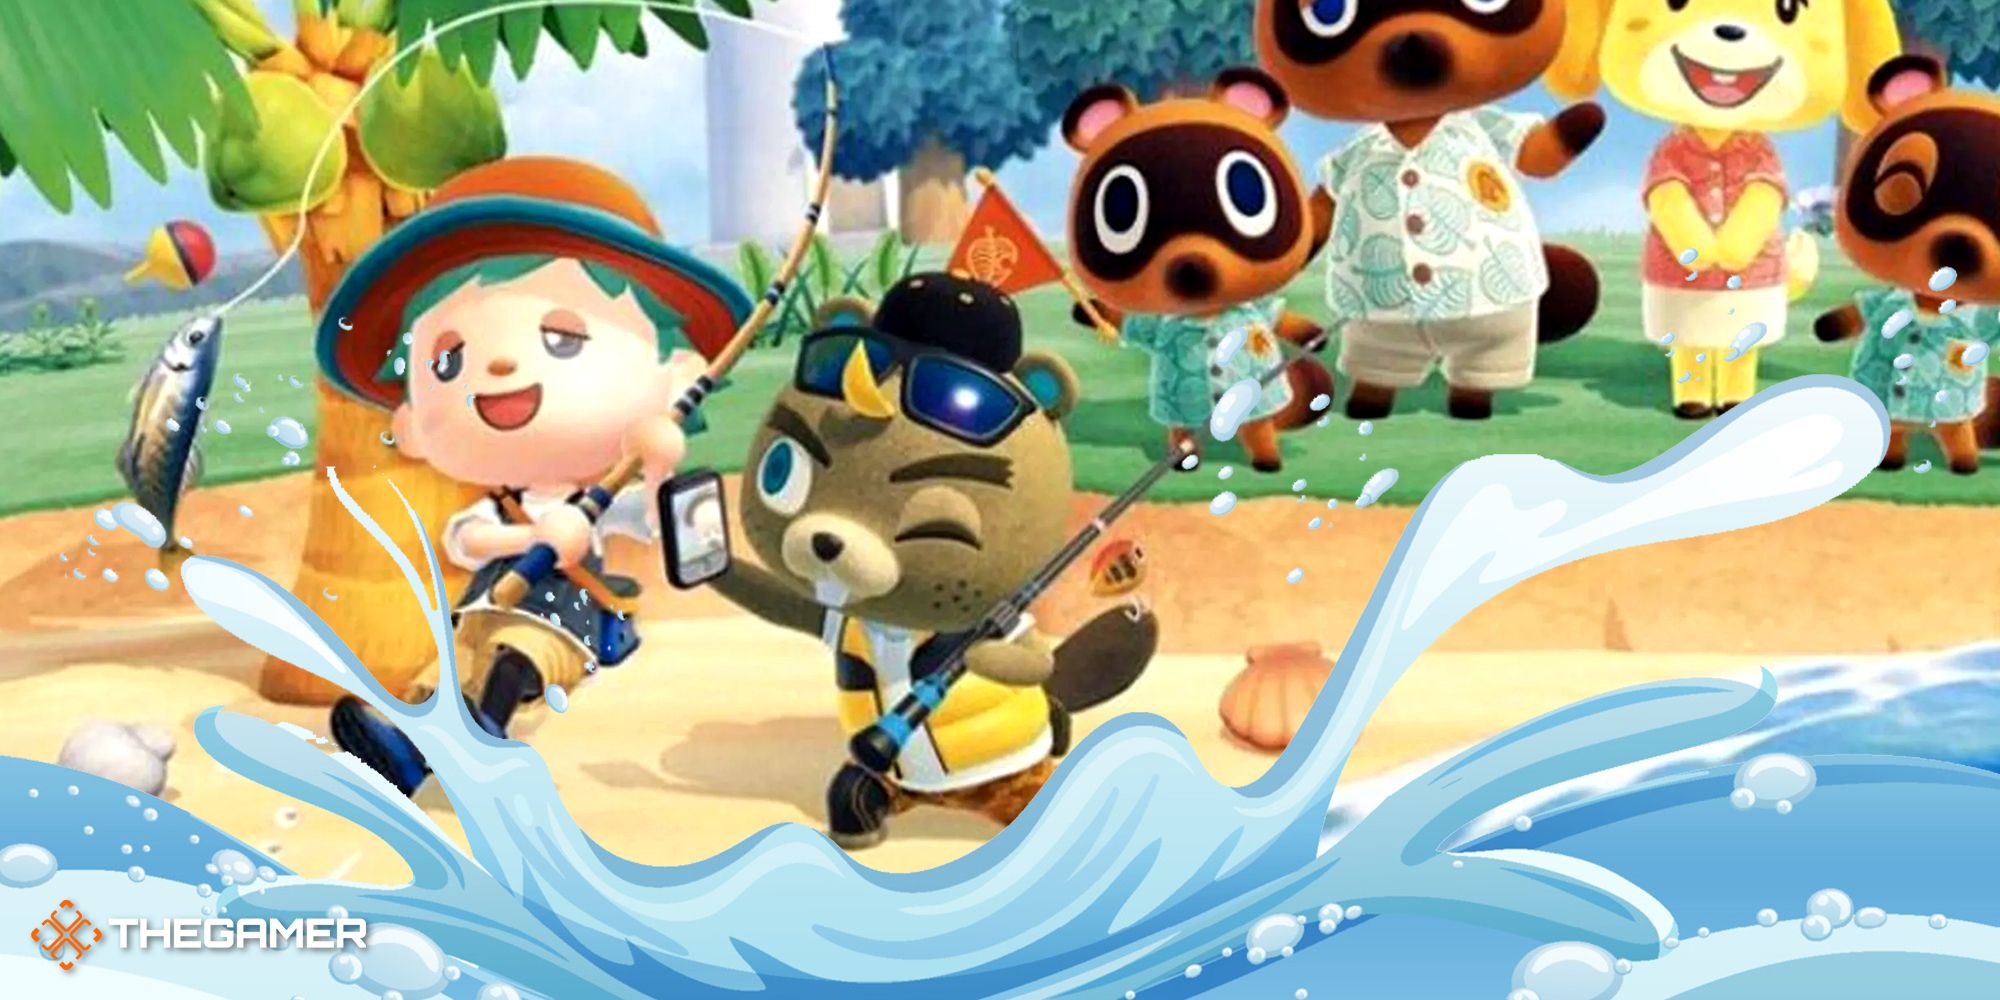 Game art from Animal Crossing New Horizons.